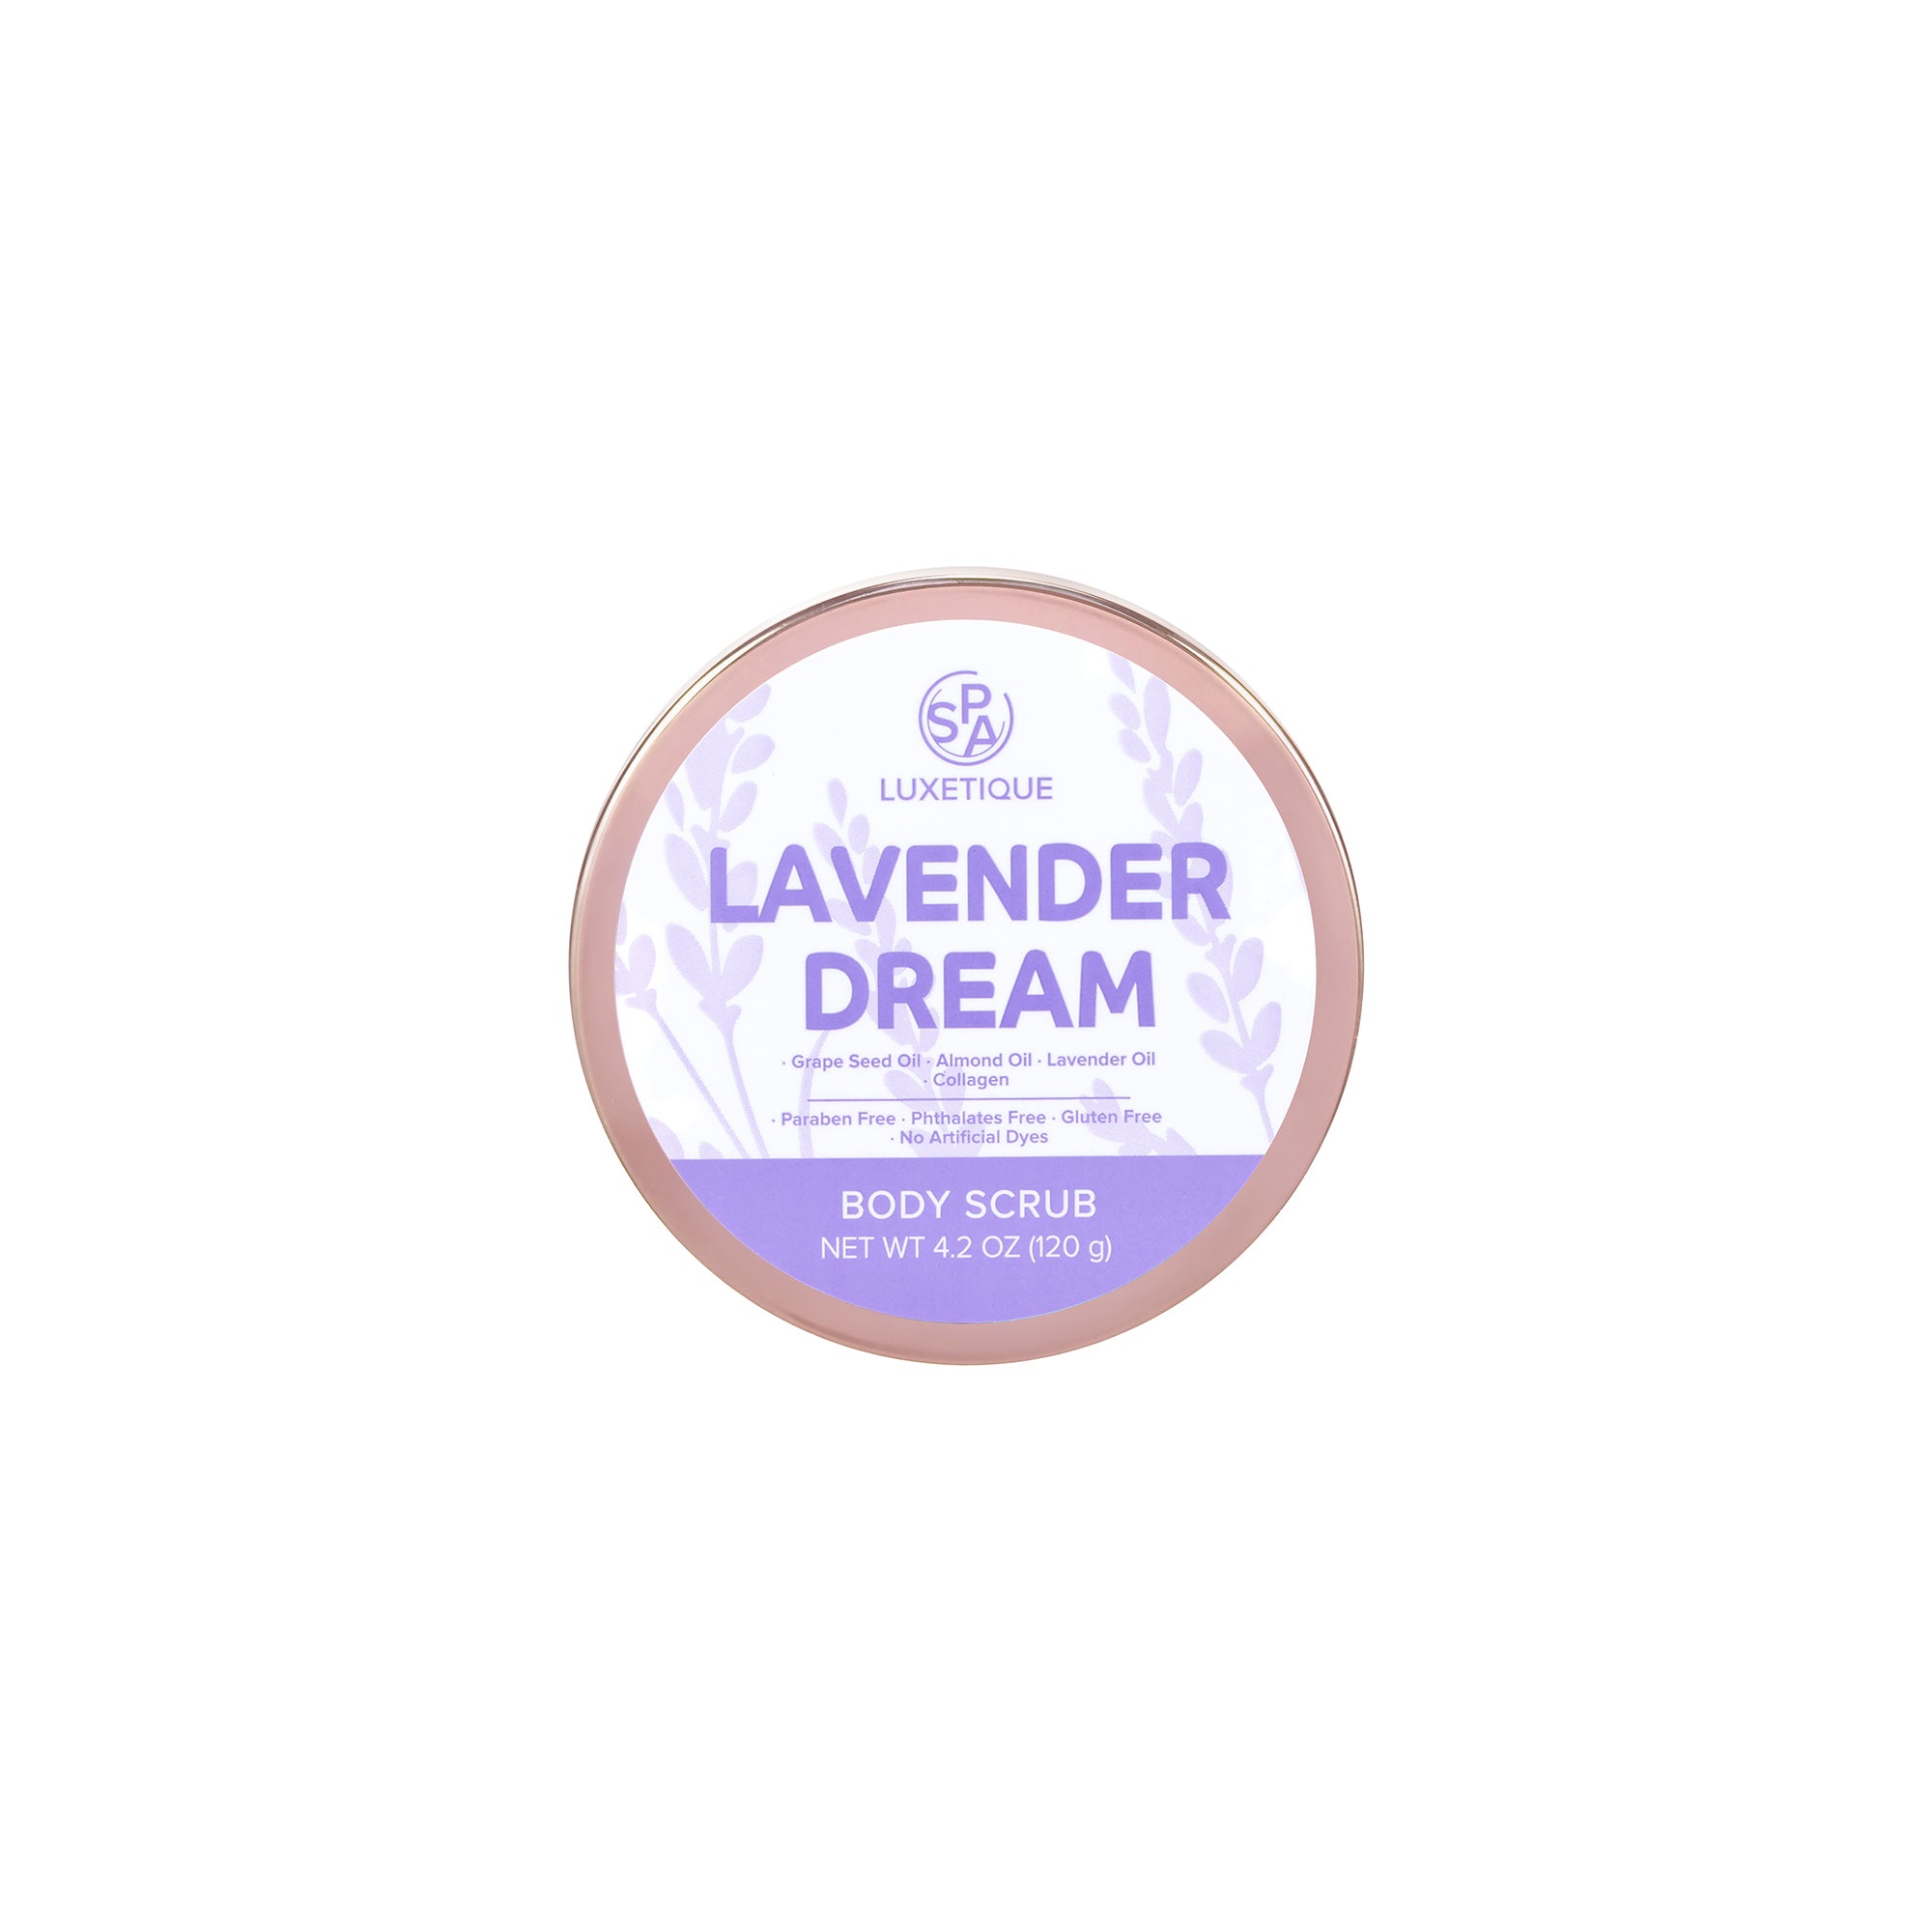 SPA Luxetique Lavender Dream Body Scrub. Self-care should be an uplifting ritual, and the Lavender Dream body scrub is the perfect way to incorporate that into your routine. Discover the joy that comes with a wellness regimen that helps you look your best and feel your best. 